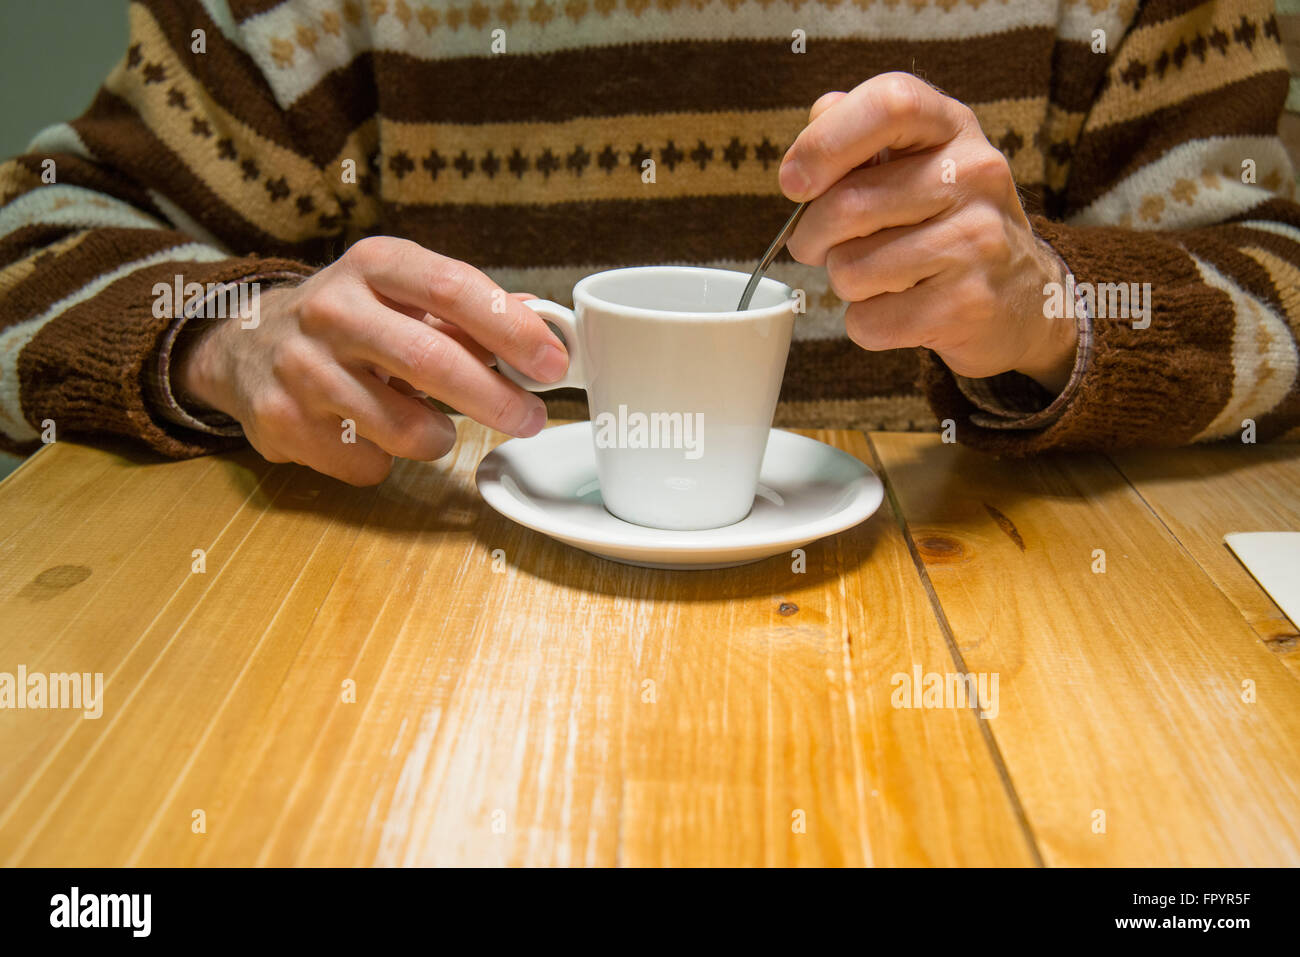 Man's hand having a cup of coffee. Close view. Stock Photo